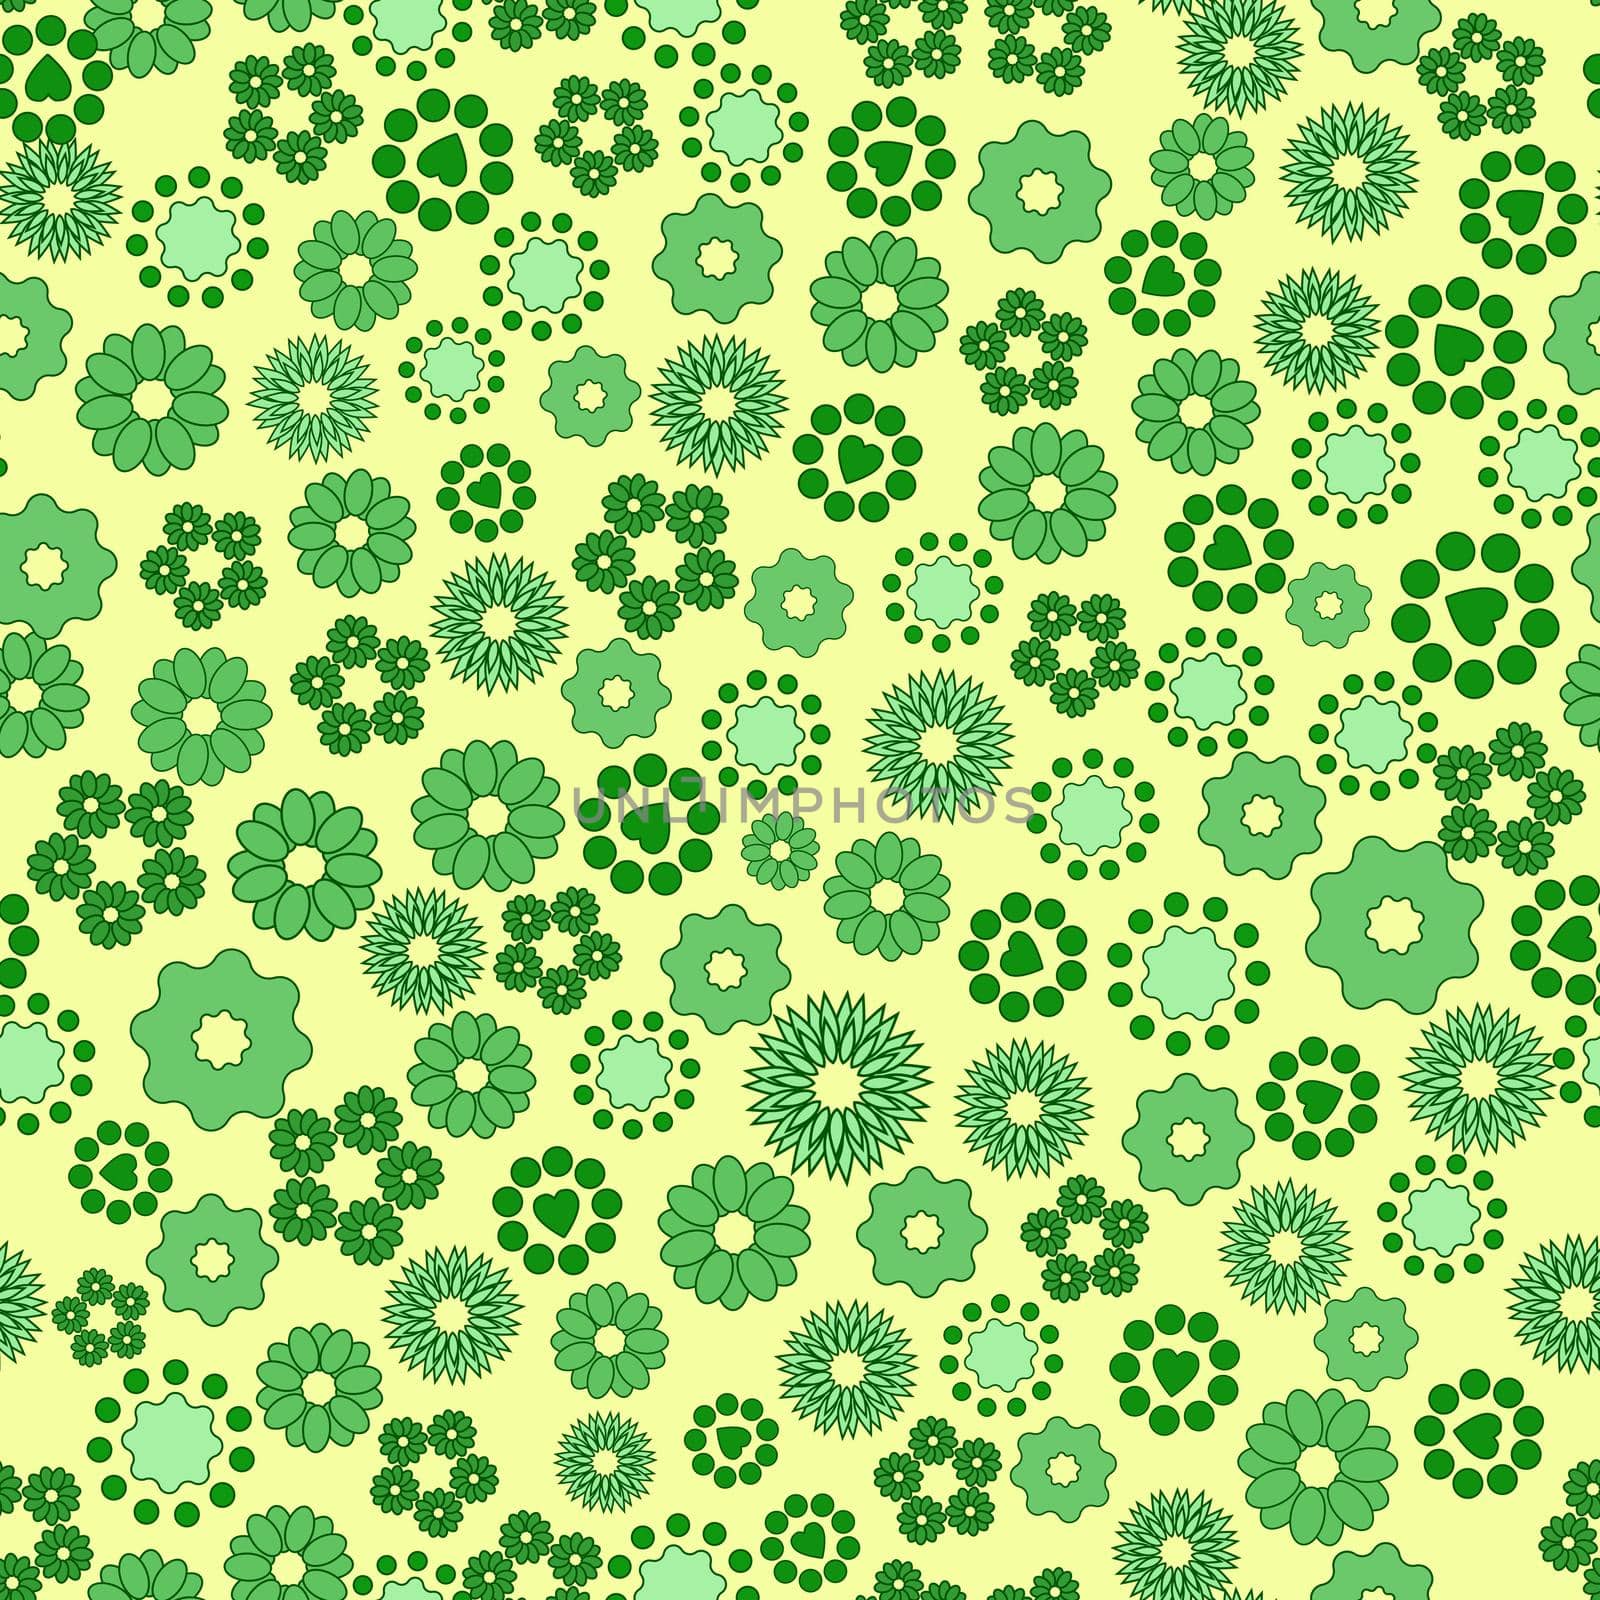 Seamless texture of green flowers and geometric elements.vector illustration